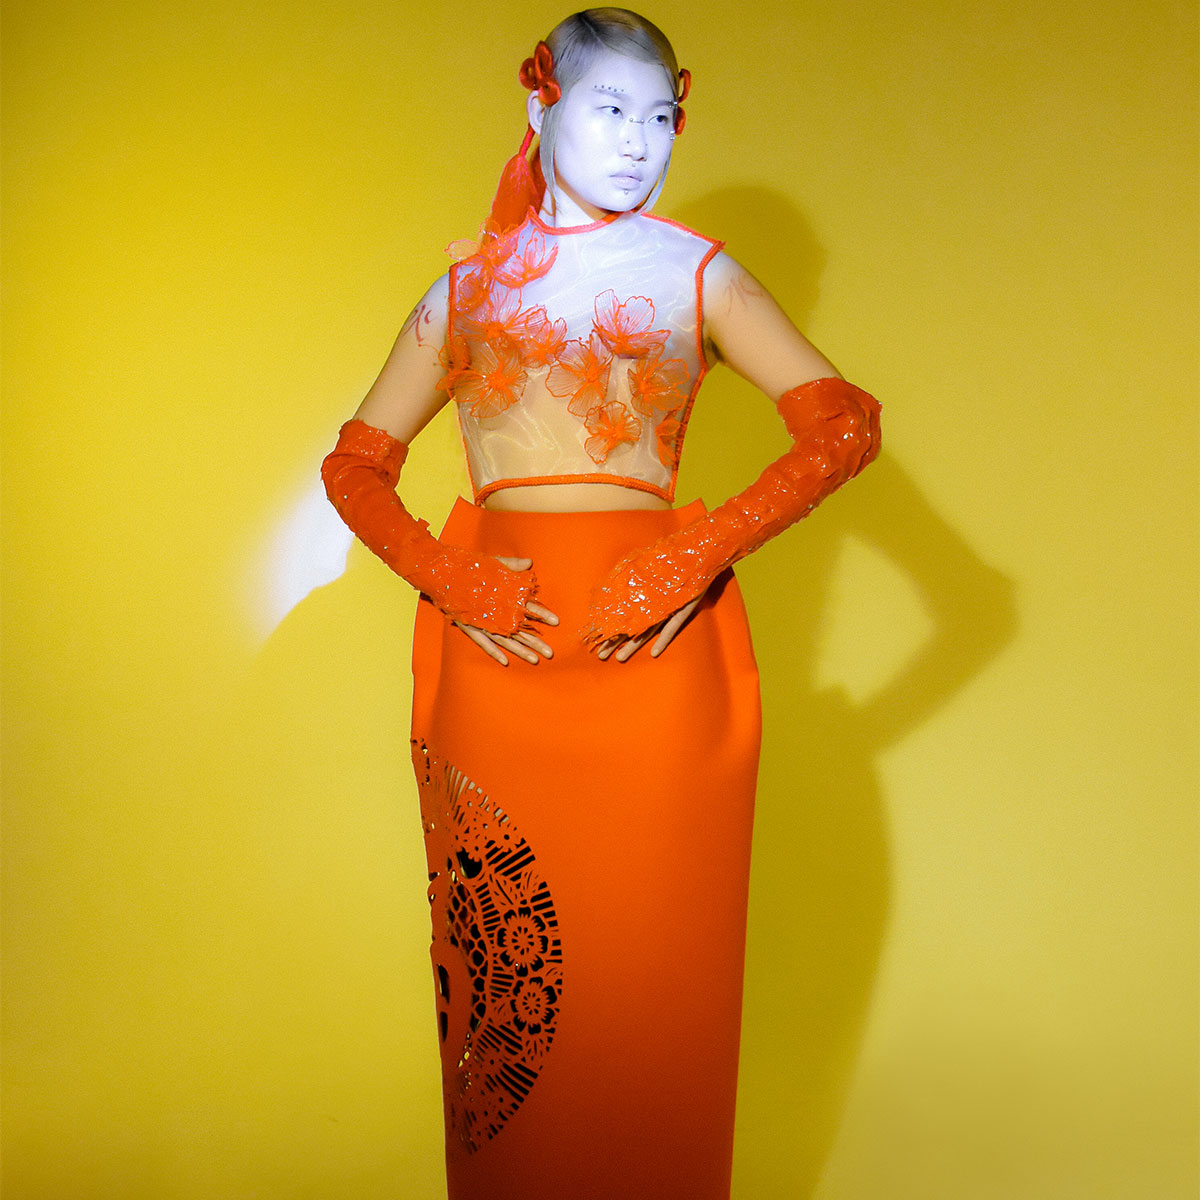 A model is standing up straight wearing a partially see-though decorative orange garment.  The garment is made of shiny material, with 3D flowers affixed, over a yellow photo backdrop. 